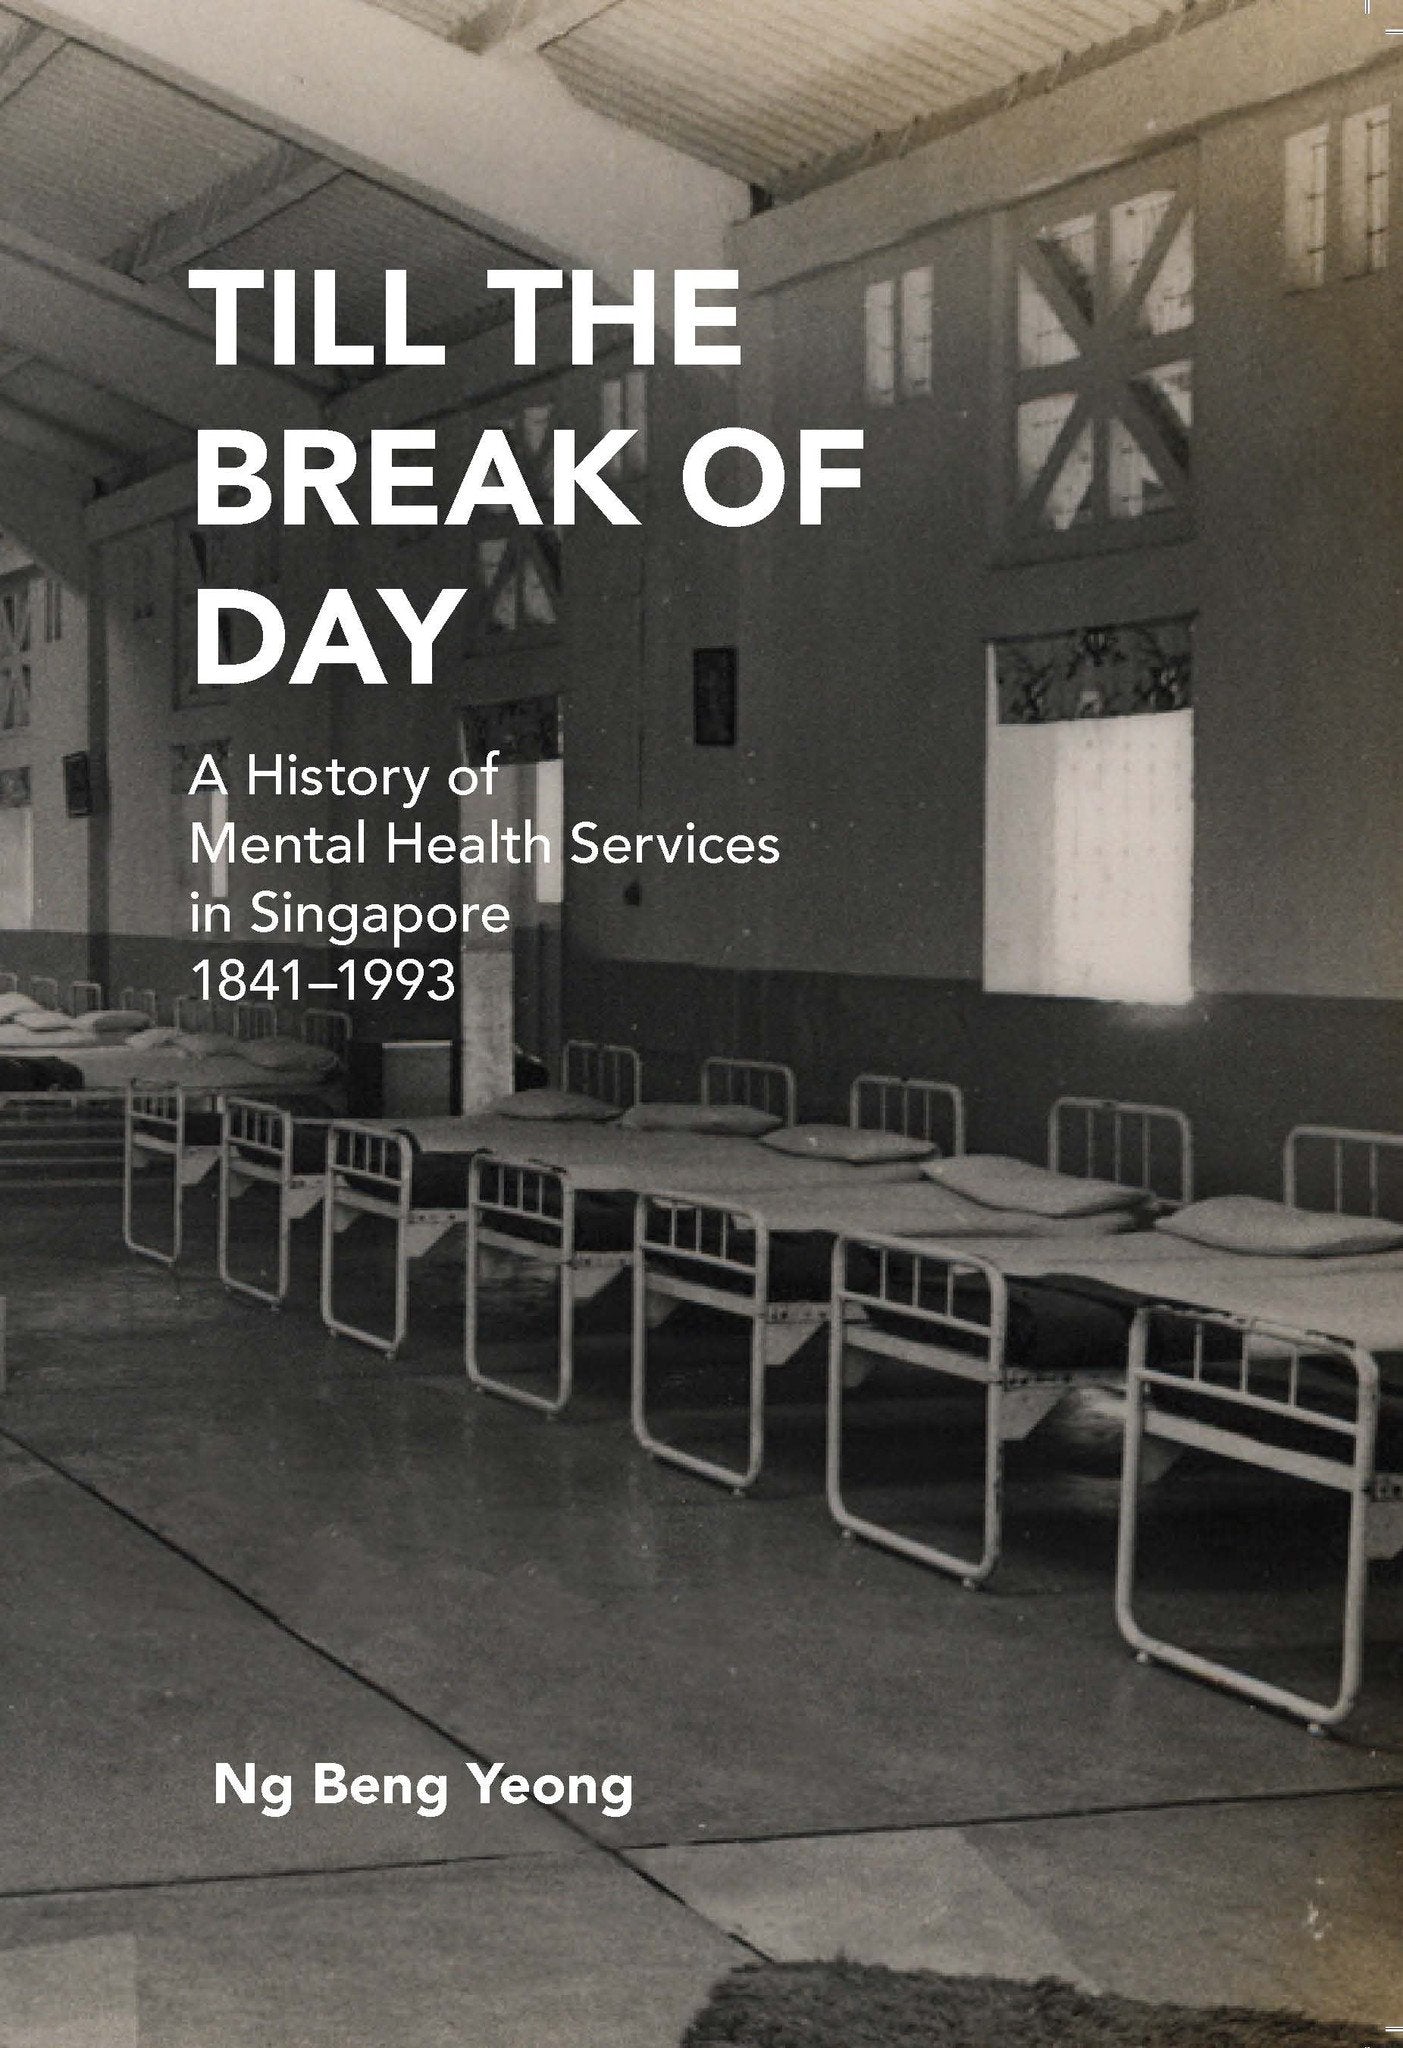 Till the Break of Day: A History of Mental Health Services in Singapore, 1841-1993